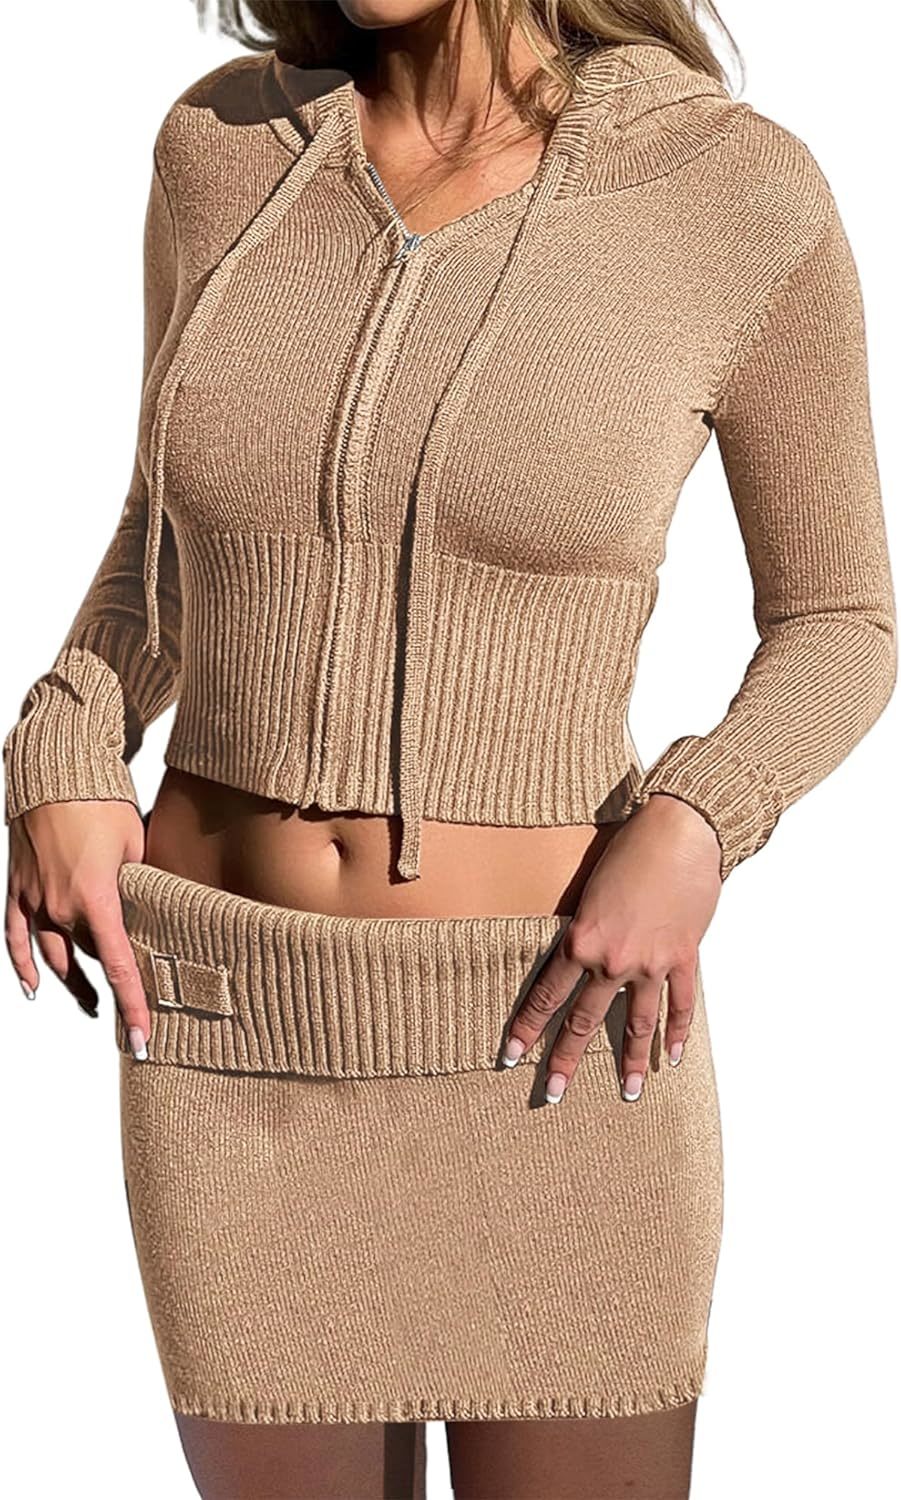 Primary image for Long Sleeve Hooded Zipper Jacket and skirt Set